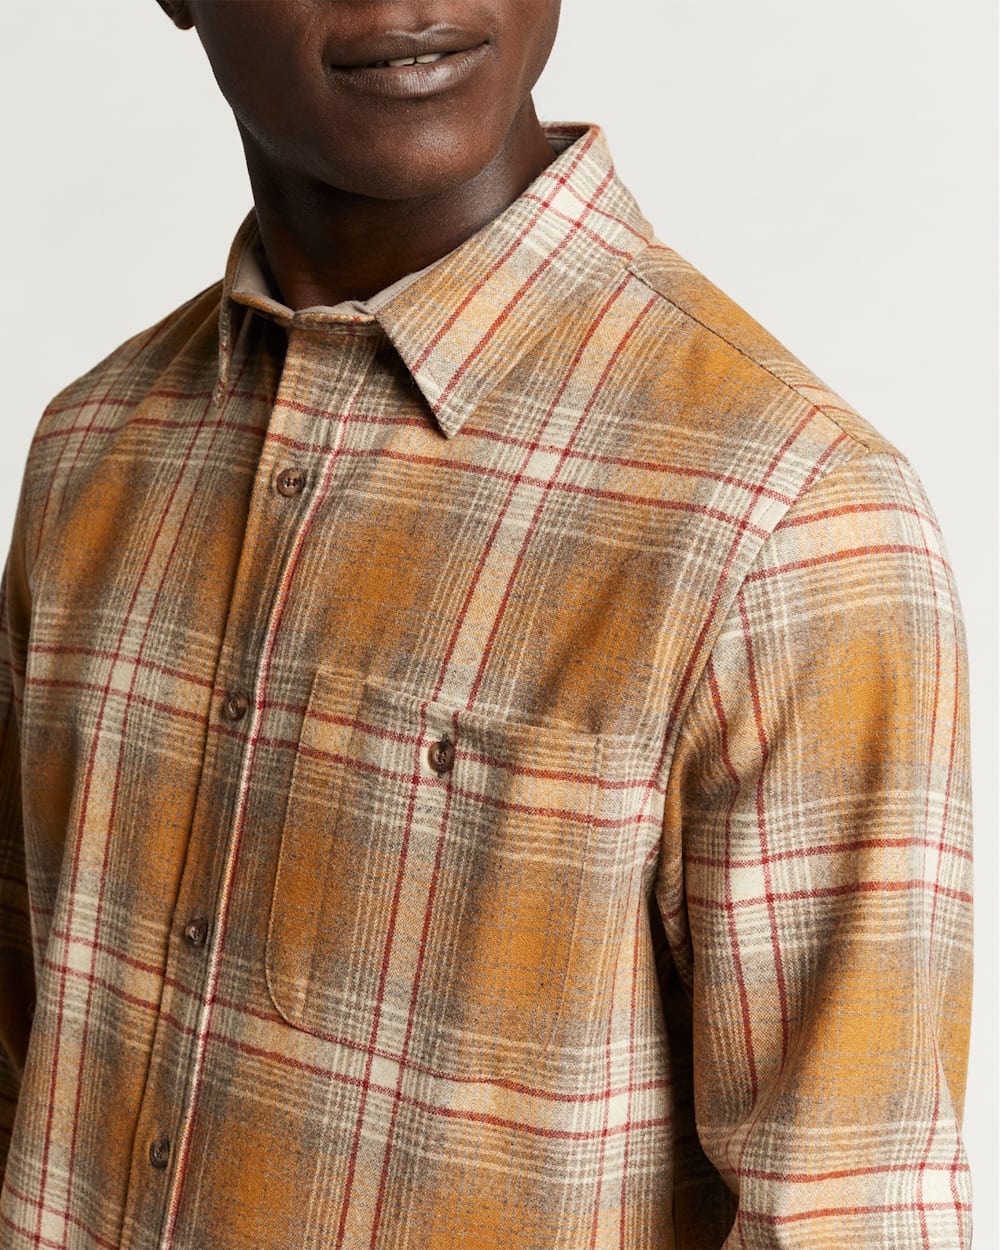 ALTERNATE VIEW OF MEN'S PLAID TRAIL SHIRT IN RED/COPPER PLAID image number 4